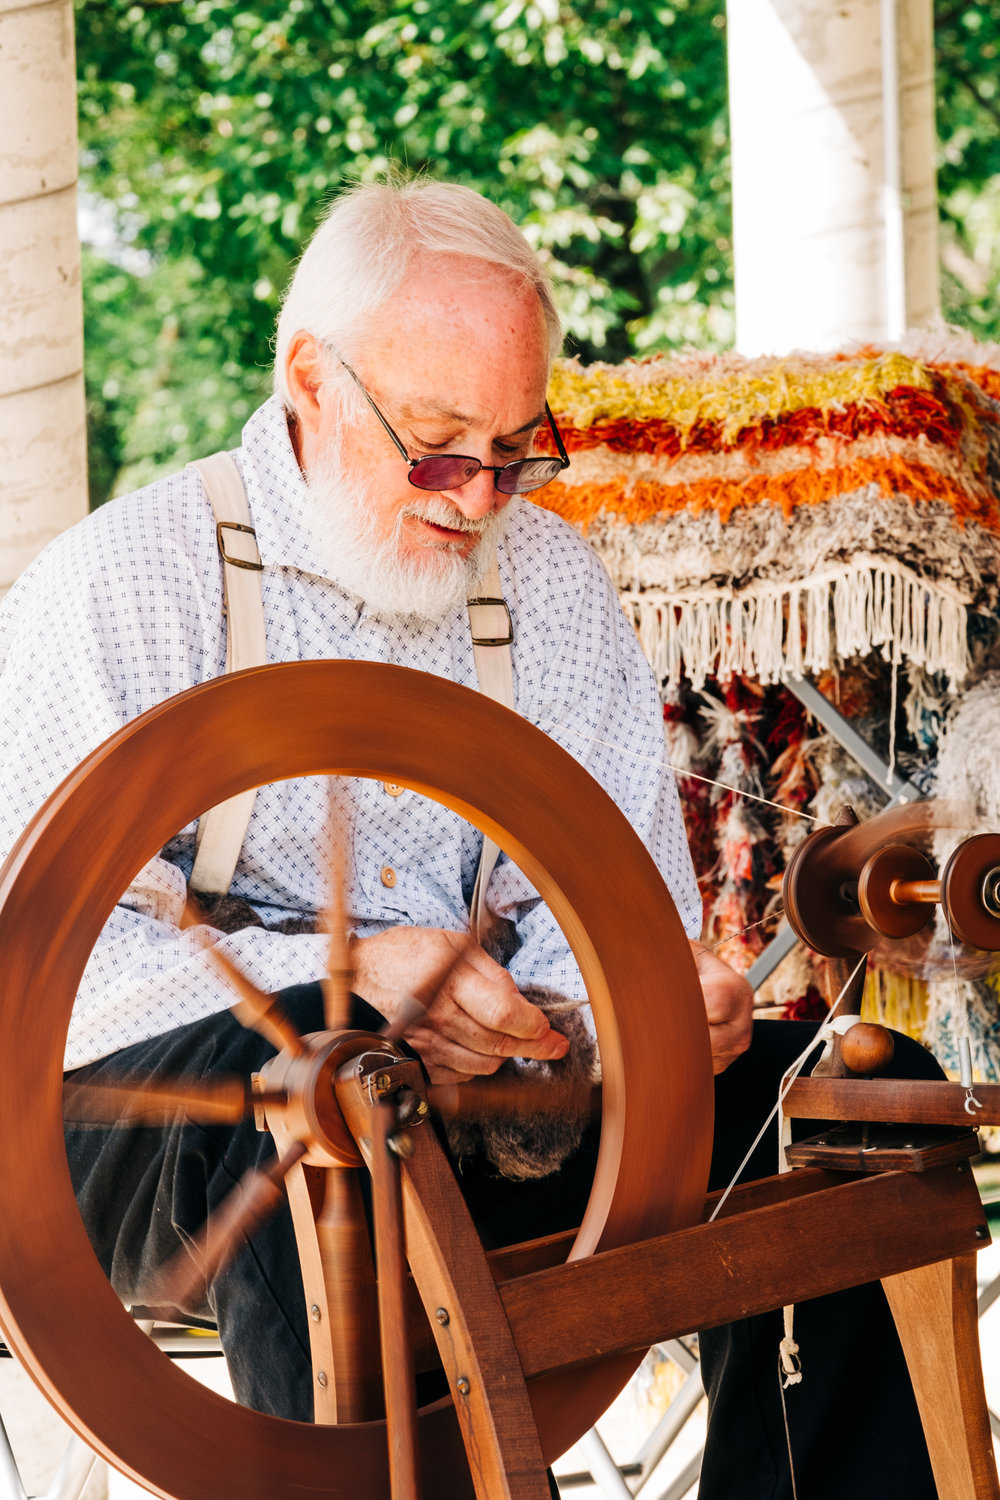 Tim Field spins wool at a demonstration during Little Balkans Days at the Crawford County History Museum on Saturday, Sept. 3.